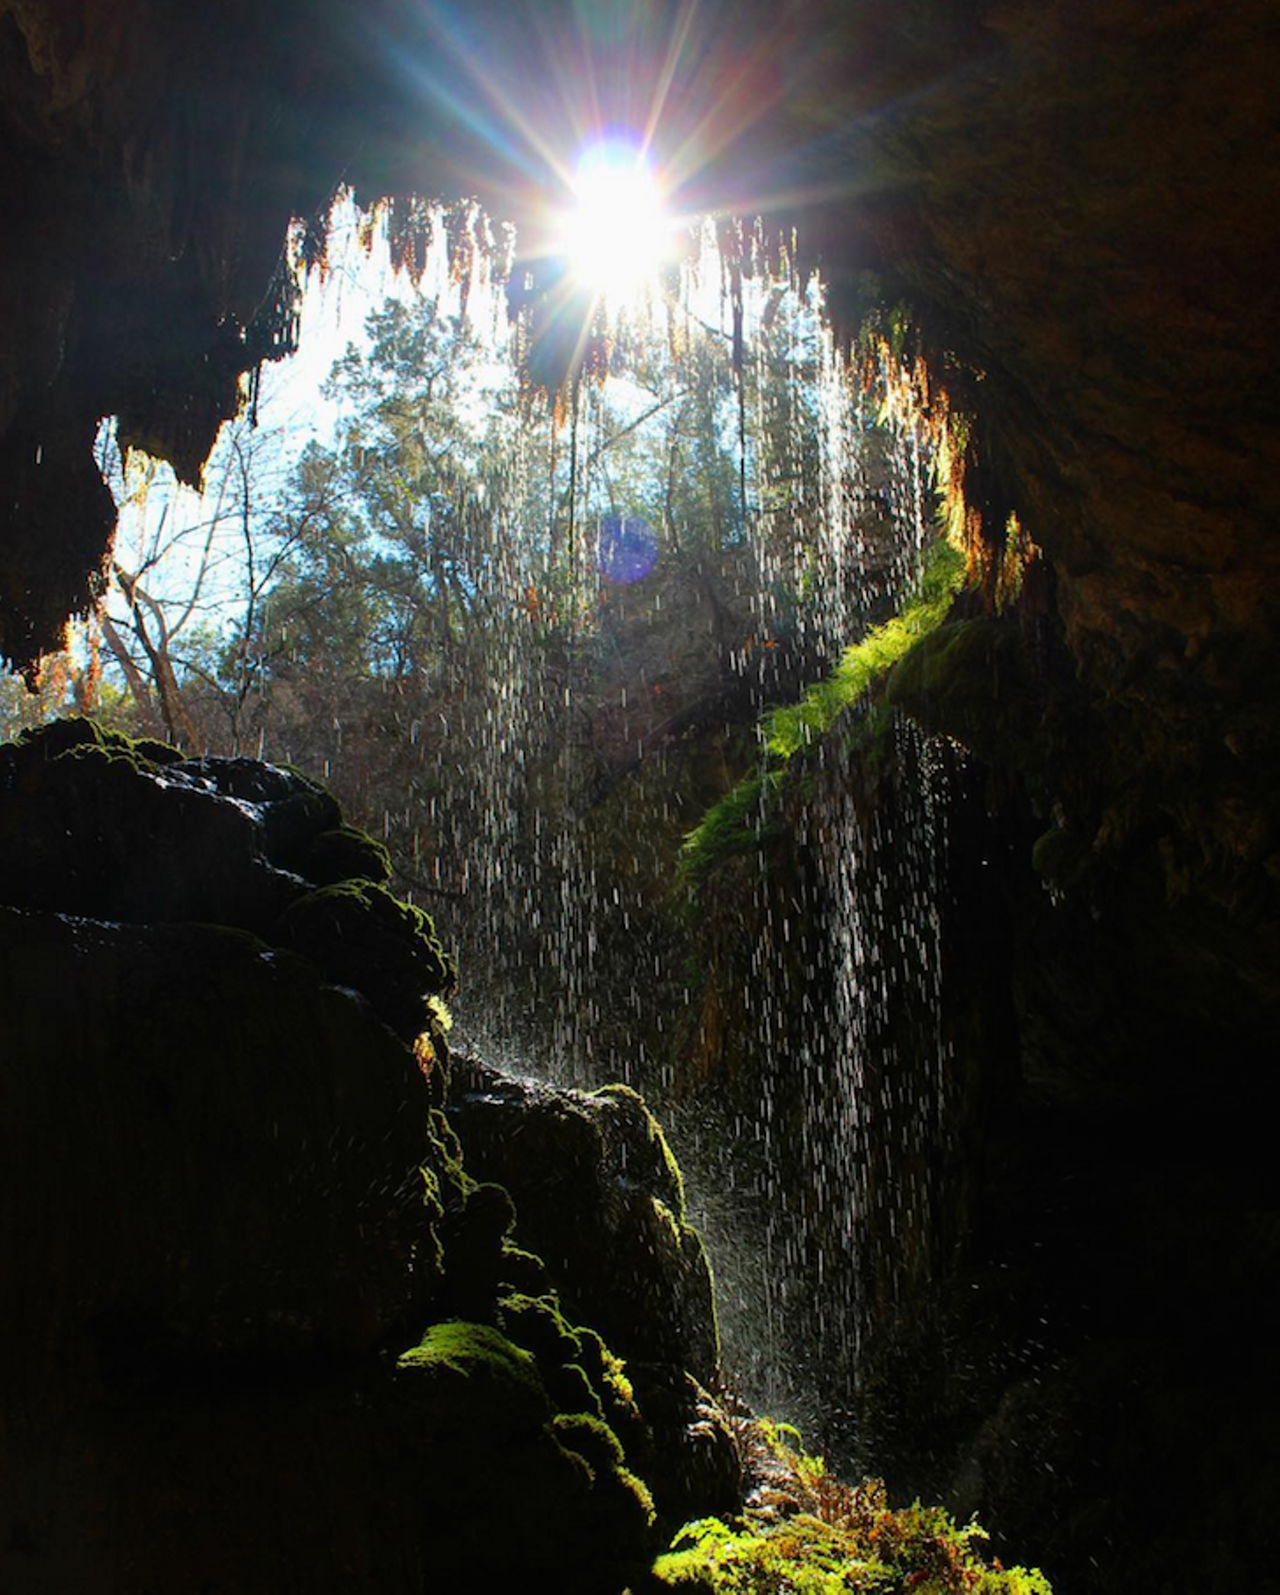 Westcave Waterfall in the Westcave Preserve  
24814 Hamilton Pool Road, Round Mountain, Texas 78663, (830) 825-3442, westcave.org 
Not far from Austin, Texas, the Westcave Preserve features a breathtaking cave formation with waterfalls and deep pools. 
Photo via Instagram (casec221)